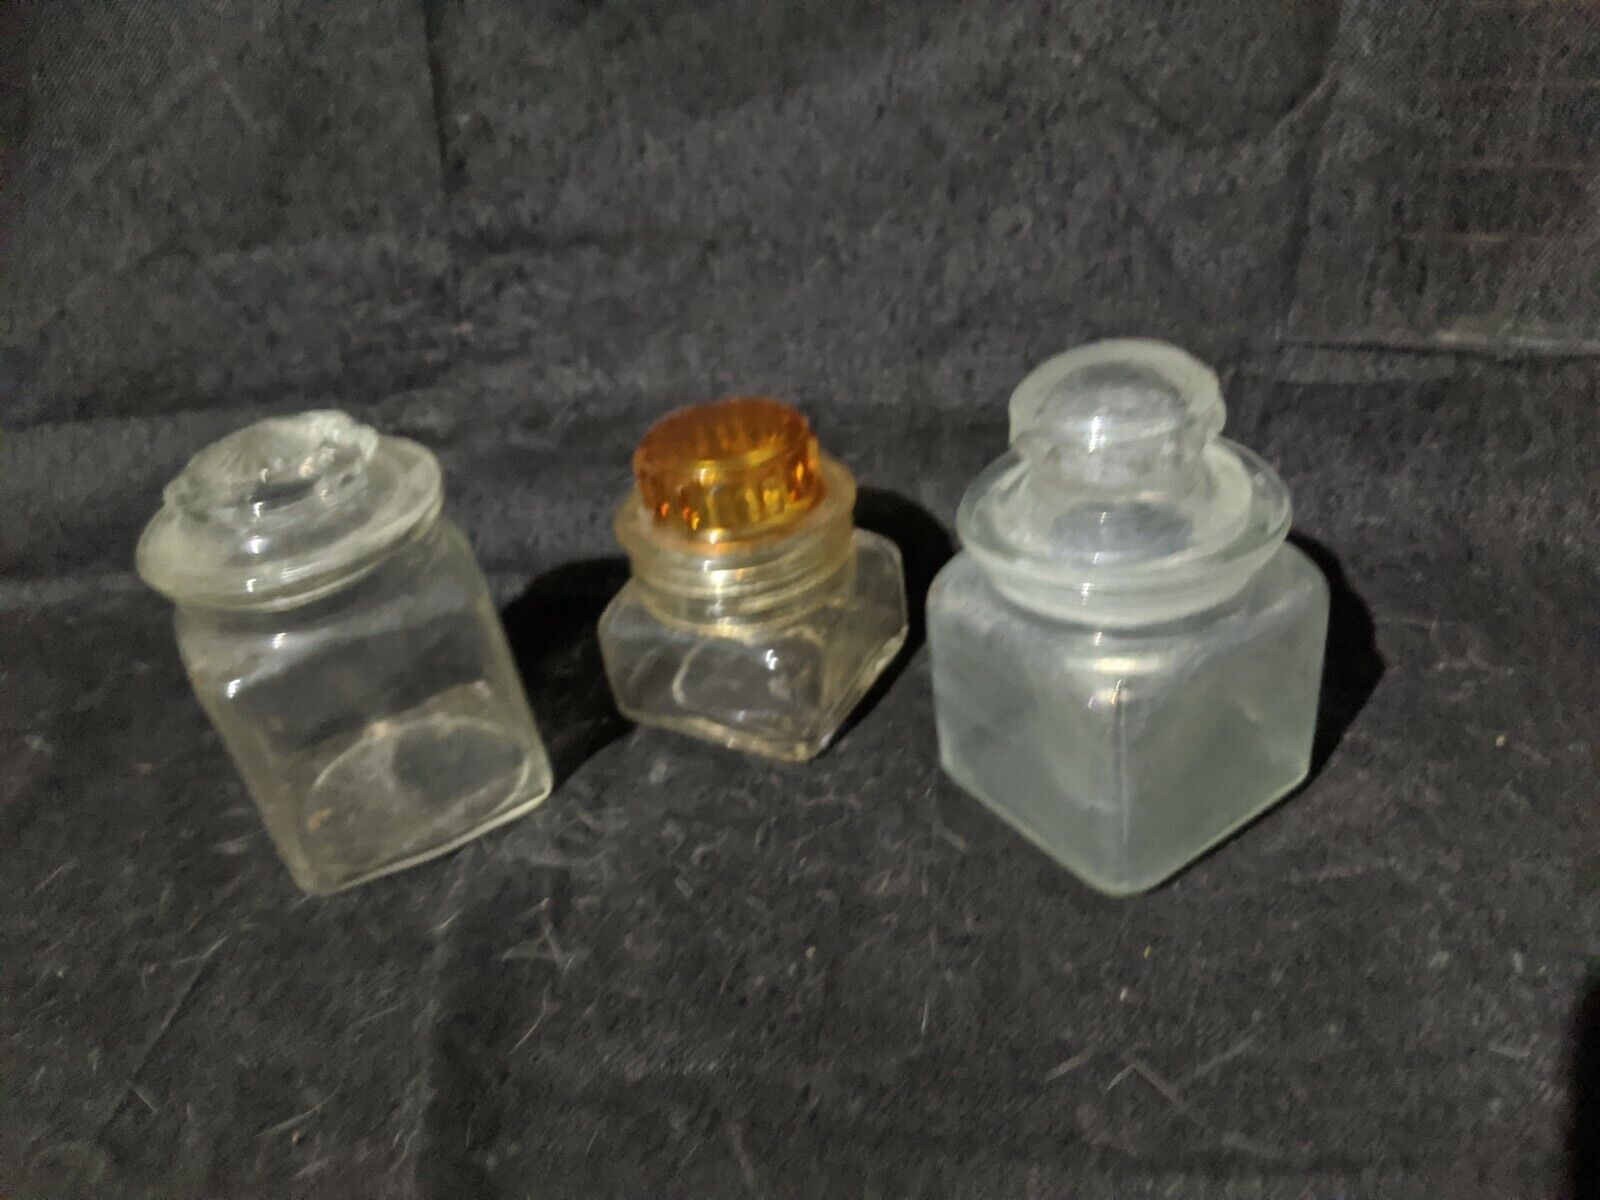 3 lot VTG Retro Glass Jar Lid Container Special Spice Tobacco Funky 60s 70s 80s